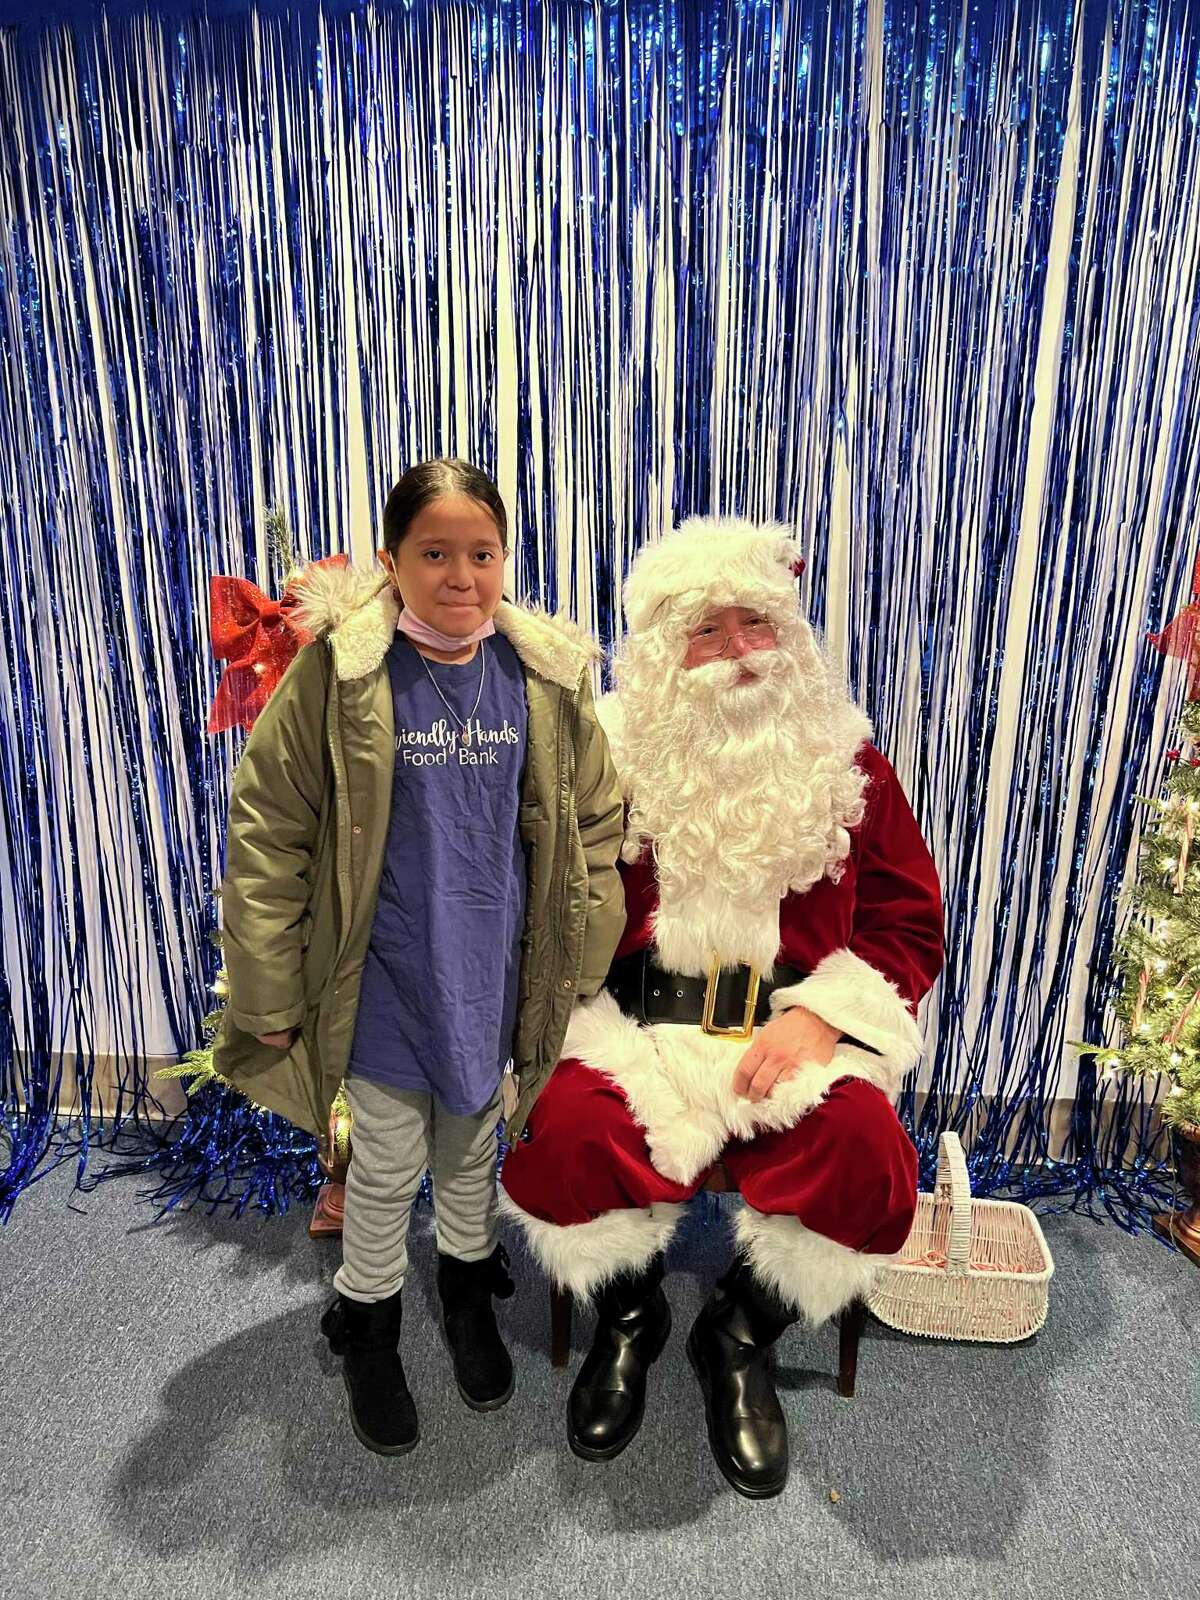 Santa Claus visited Friendly Hands Food Bank Dec. 5, giving visiting children a chance to share their Christmas wishes with him.